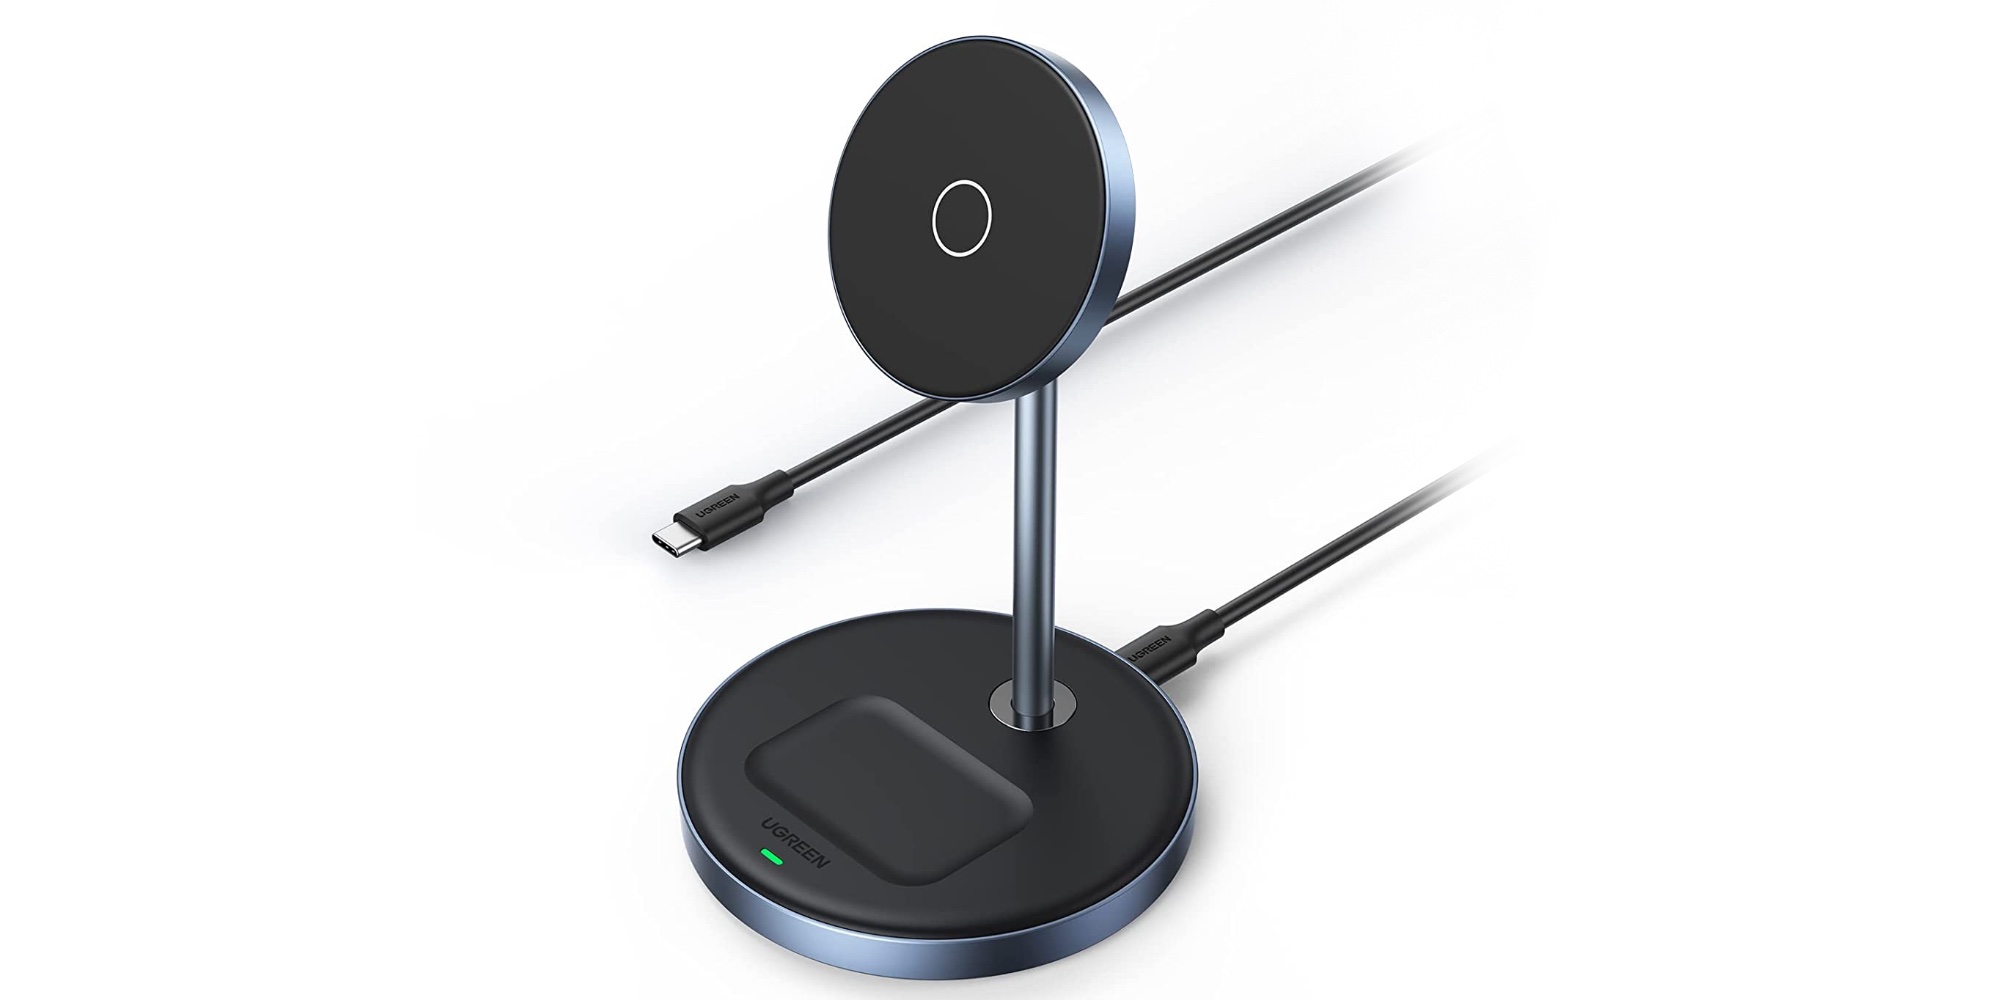 Smartphone Accessories: UGREEN 2-in-1 MagSafe Stand $33 (Reg. $46